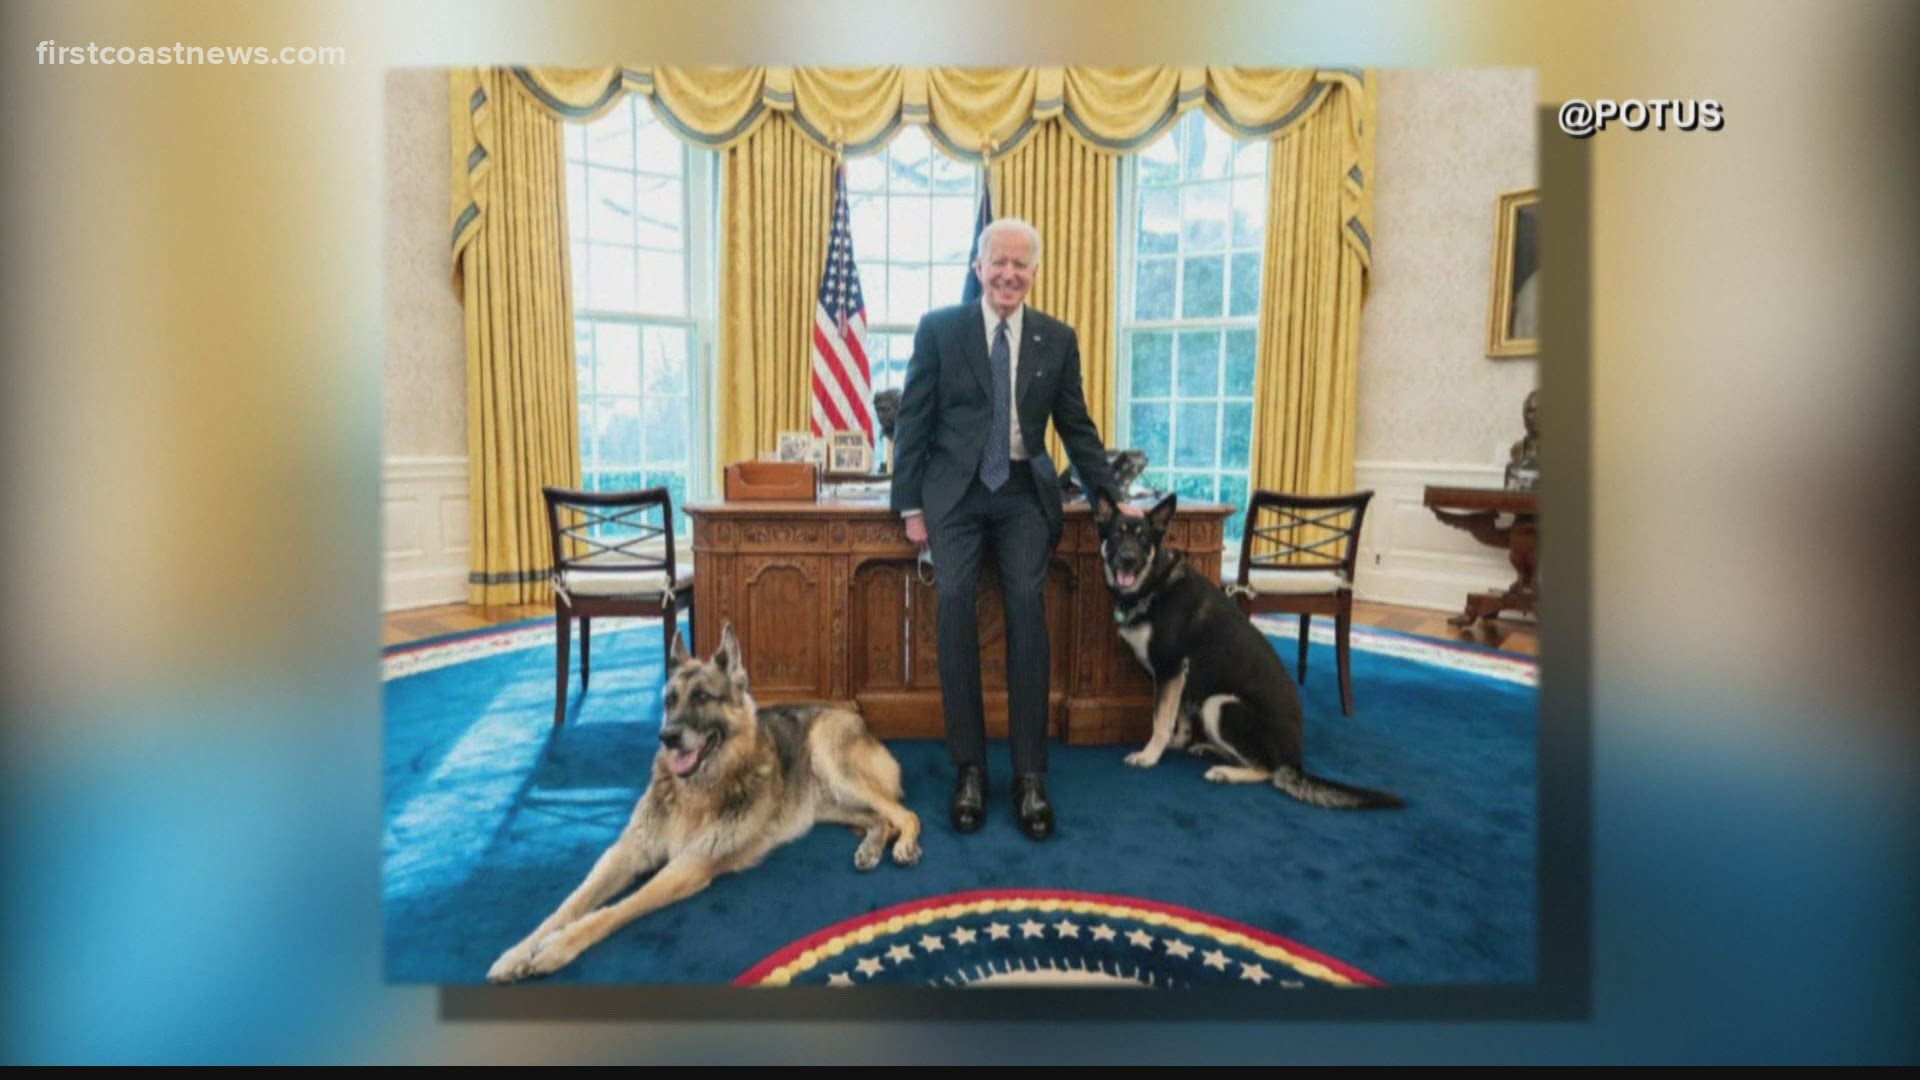 Major, a rescue, reportedly had what CNN describes as a "biting incident" with a member of White House security. The exact condition of the victim is unknown.